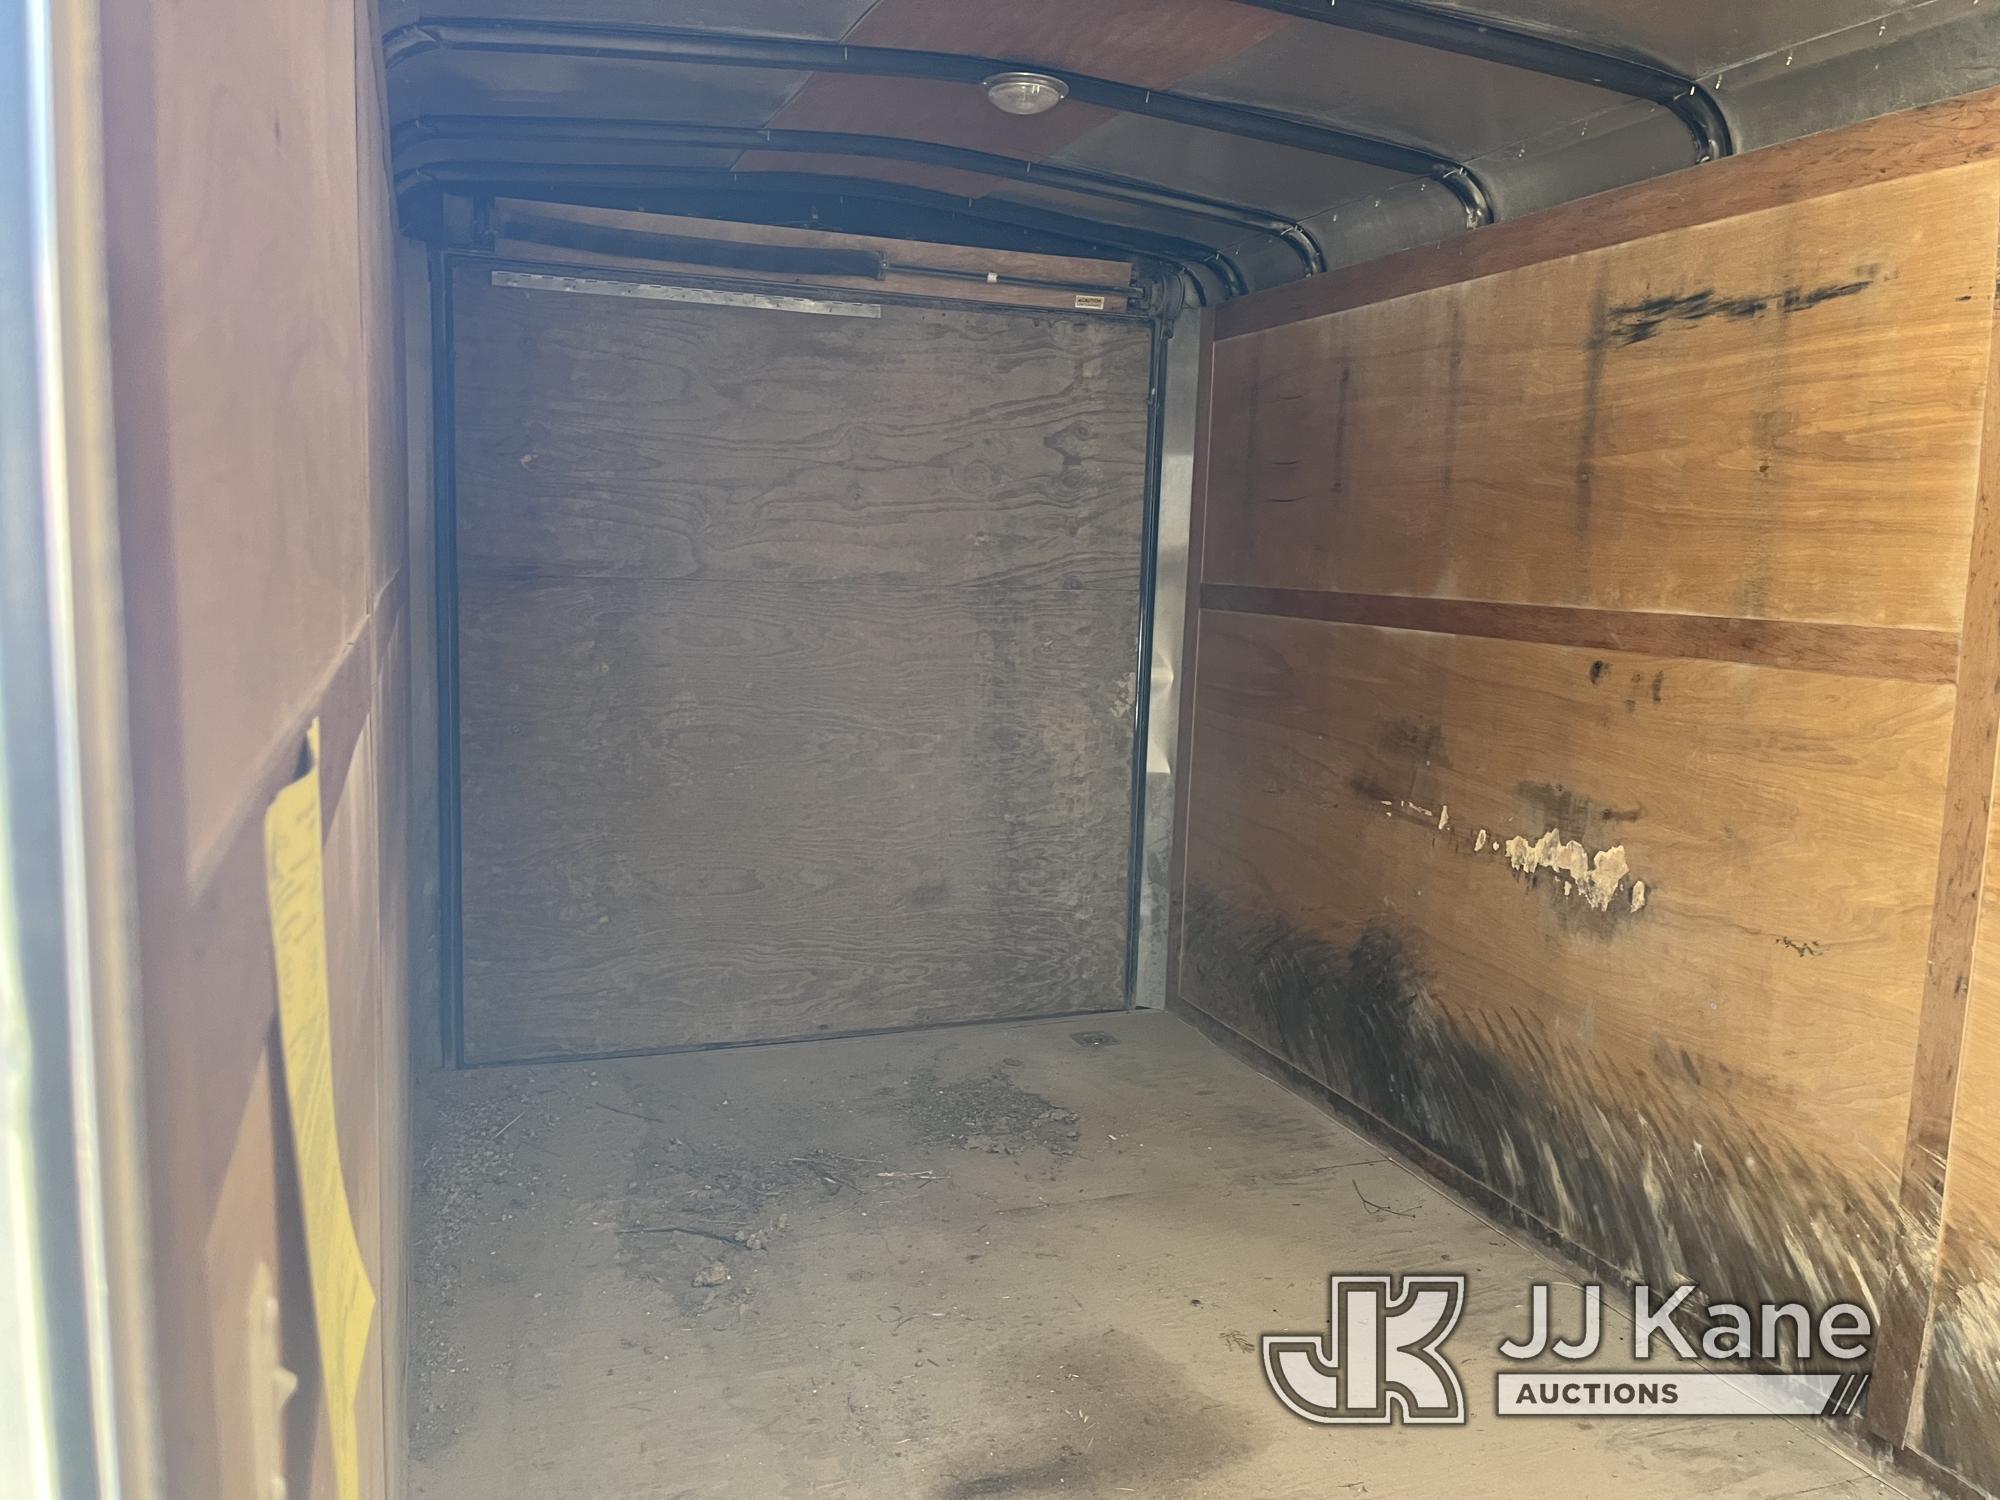 (Hawk Point, MO) 2016 Forest River T/A Enclosed Trailer No Title) (Seller States: Needs New Axle & B